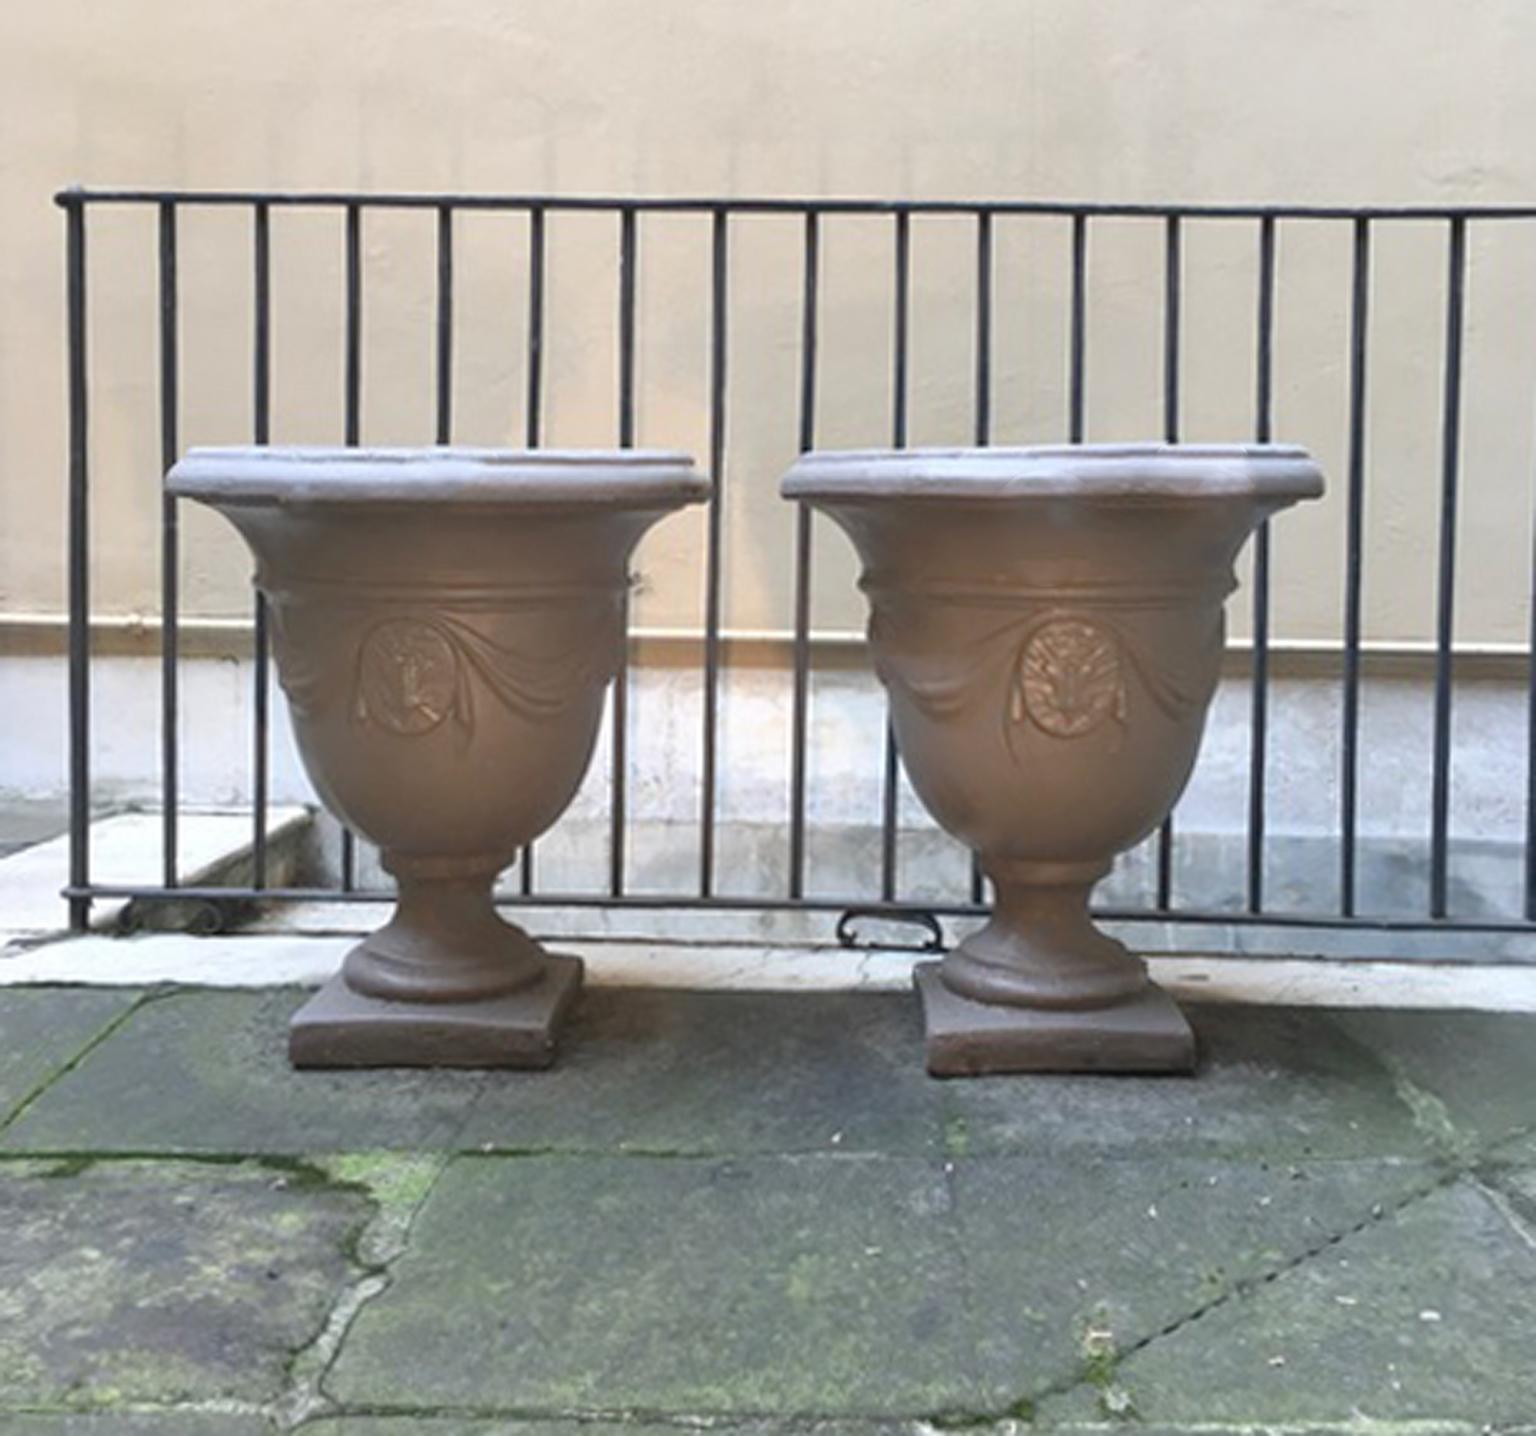 This is a pair of Italian gardens urns made in agglomeration of sand of stones, stone sable add to the cement. 
The result is a mixture very strong and resistent to the bad weather, but less expensive than a marble urns in the same dimensions. To